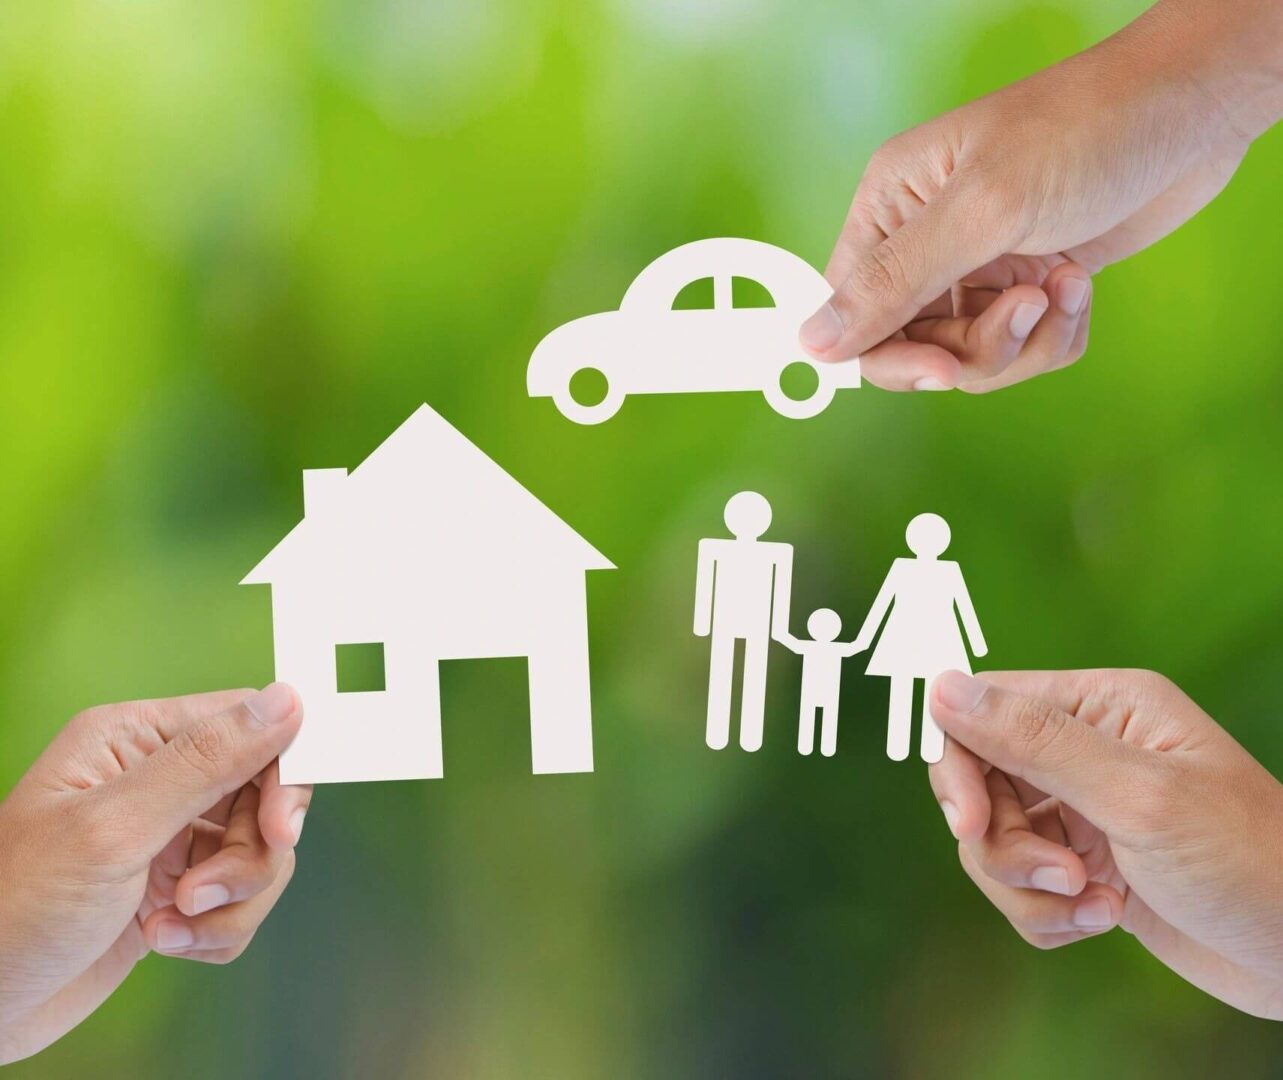 Hands Holding Paper House, Car and Family